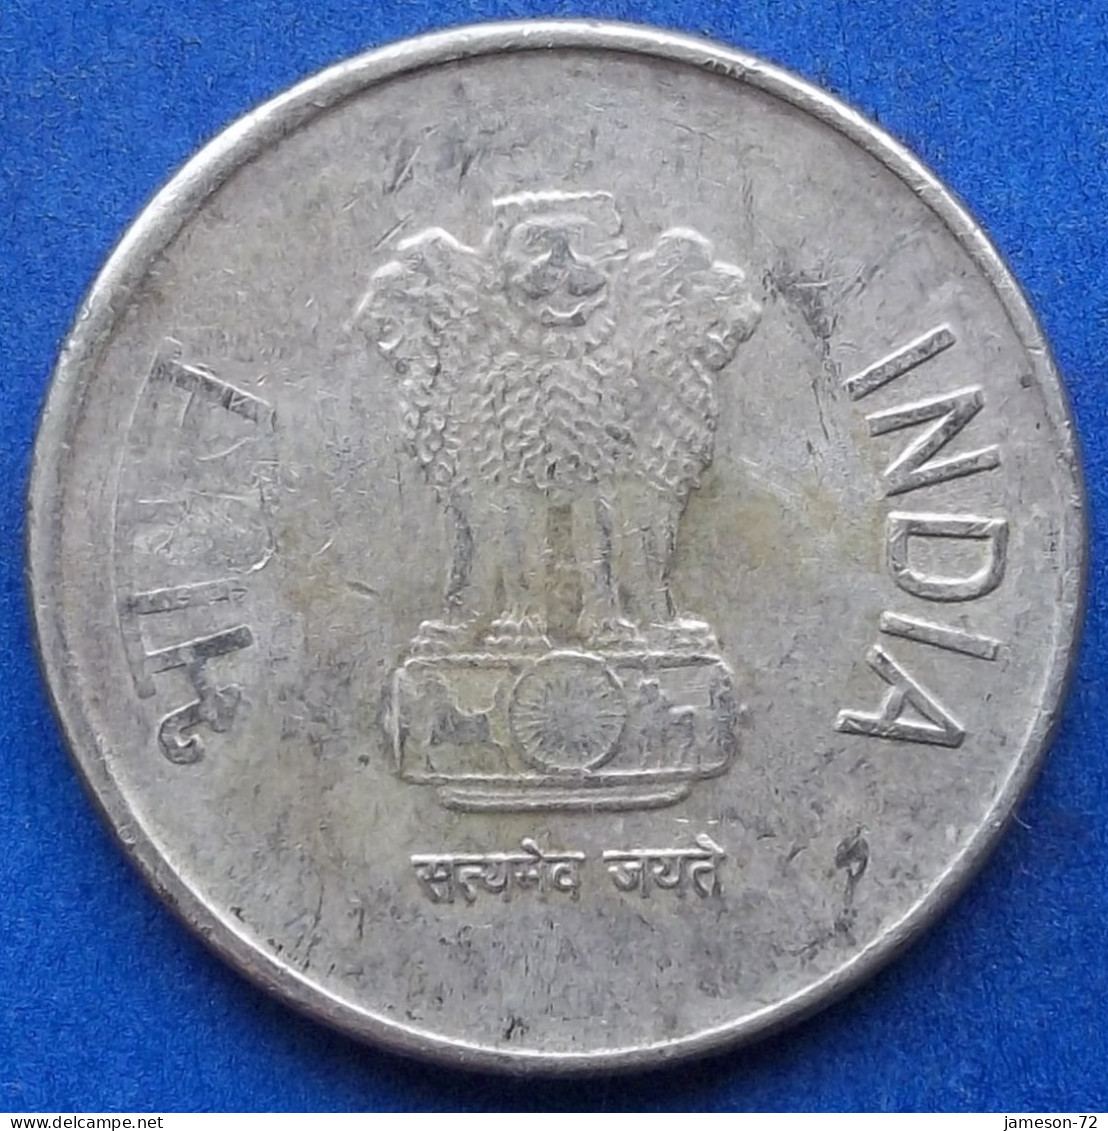 INDIA - 5 Rupees 2016 "Lotus Flowers" KM# 399.1 Republic Decimal Coinage (1957) - Edelweiss Coins - Georgia